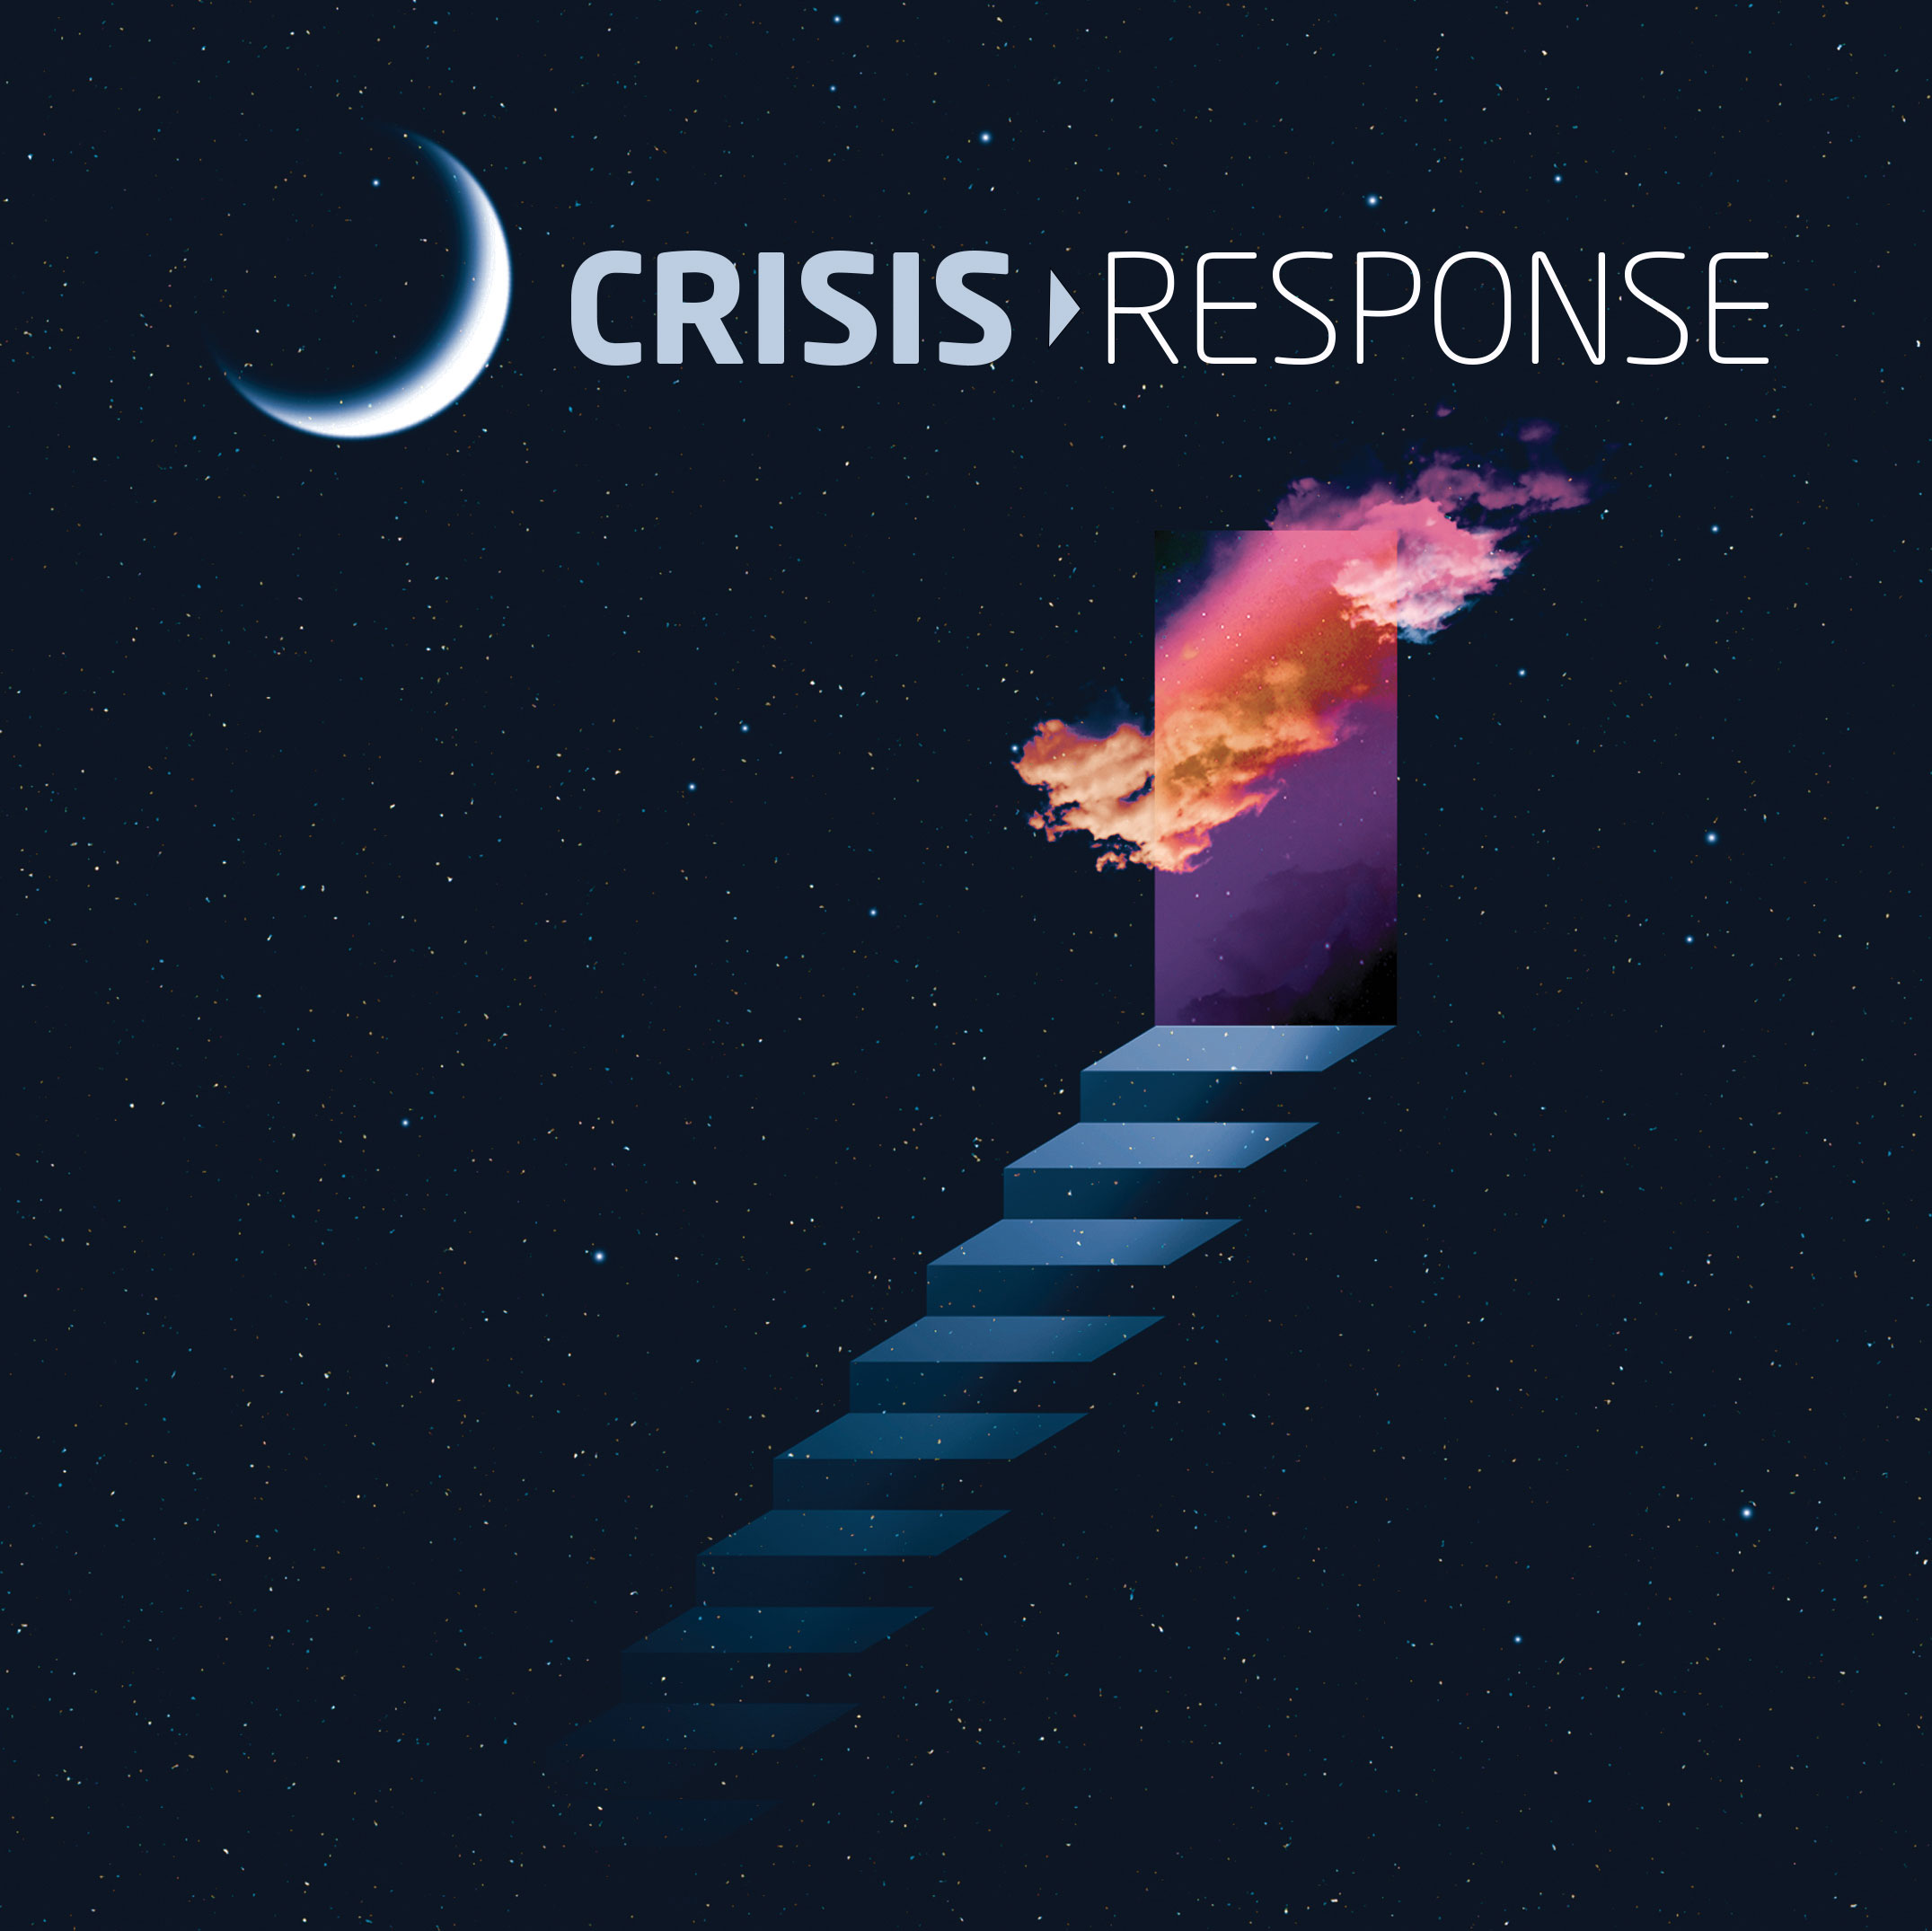 CRJ 17:3 Out now!*The September edition of the CRJ is nearly ready! Our cover reflects the unknown horizons, risks, threats and opportunities that the growing space industry presents. Here's what else is inside...